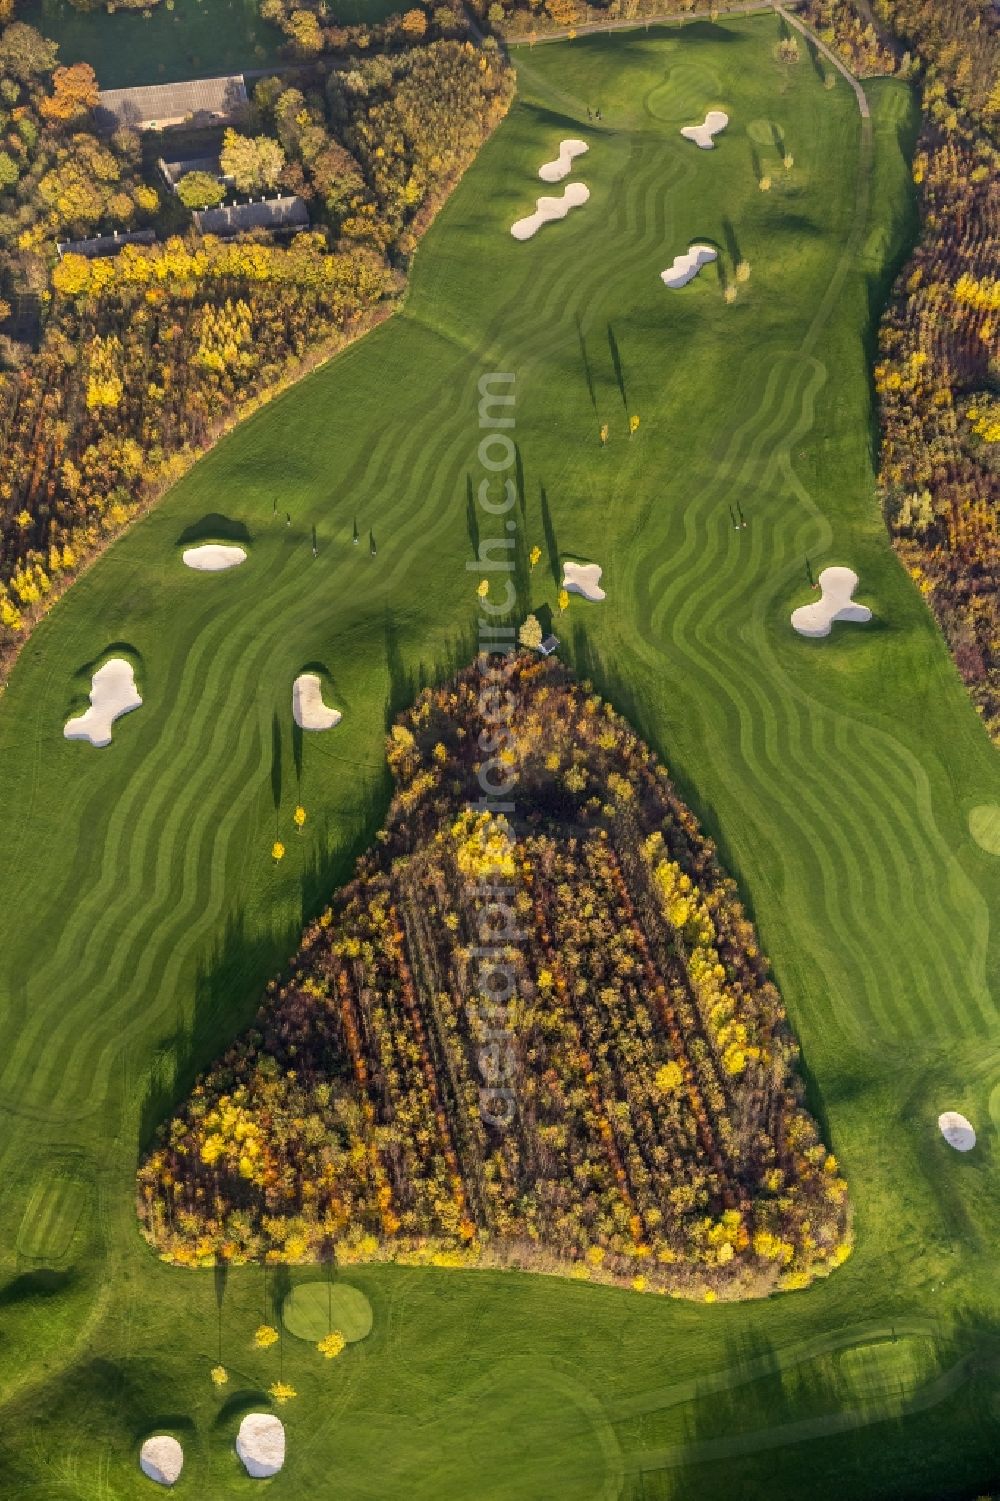 Aerial photograph Duisburg - View of the autumnal golf course of the club Golf And More at Altenbrucher Damm in Duisburg - Huckingen in the state North Rhine-Westphalia. The golf links with its fairway, rough, bunkering and putting green is located directly on the banks of the lake Remberger See in the south of the Ruhr region city Duisburg